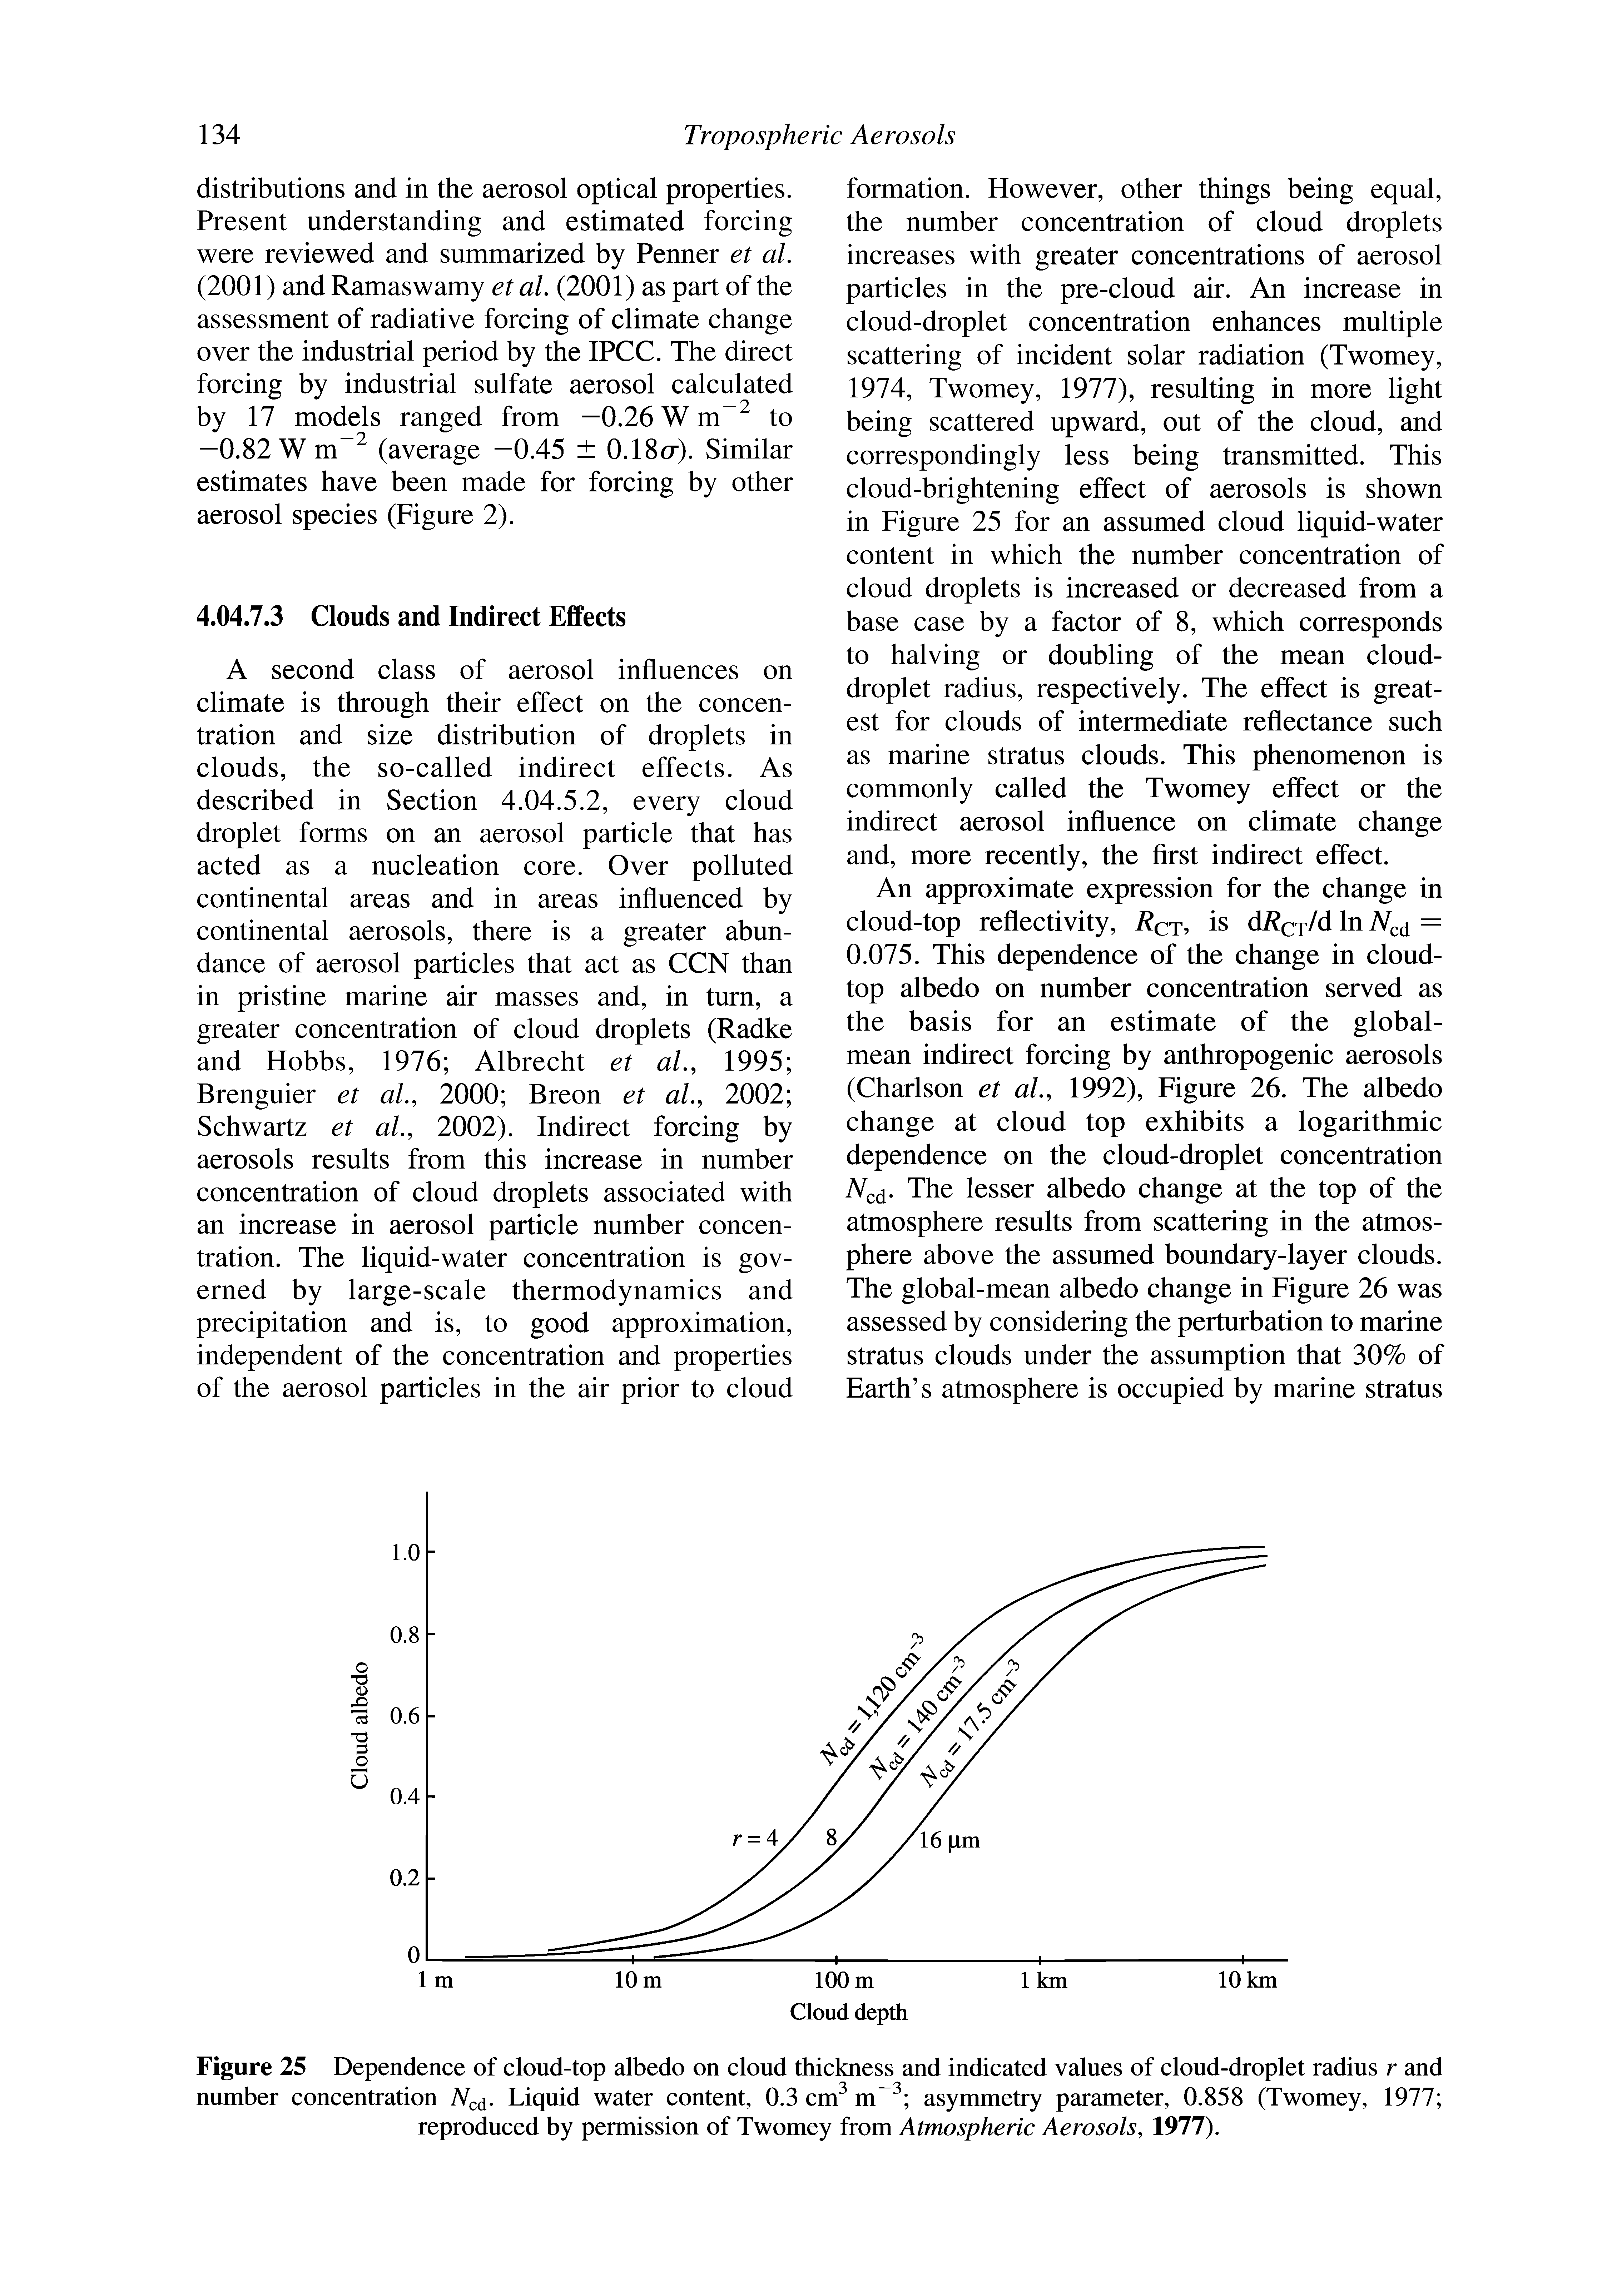 Figure 25 Dependence of cloud-top albedo on cloud thickness and indicated values of cloud-droplet radius r and number concentration Liquid water content, 0.3 cm asymmetry parameter, 0.858 (Twomey, 1977 reproduced by permission of Twomey from Atmospheric Aerosols, 1977).